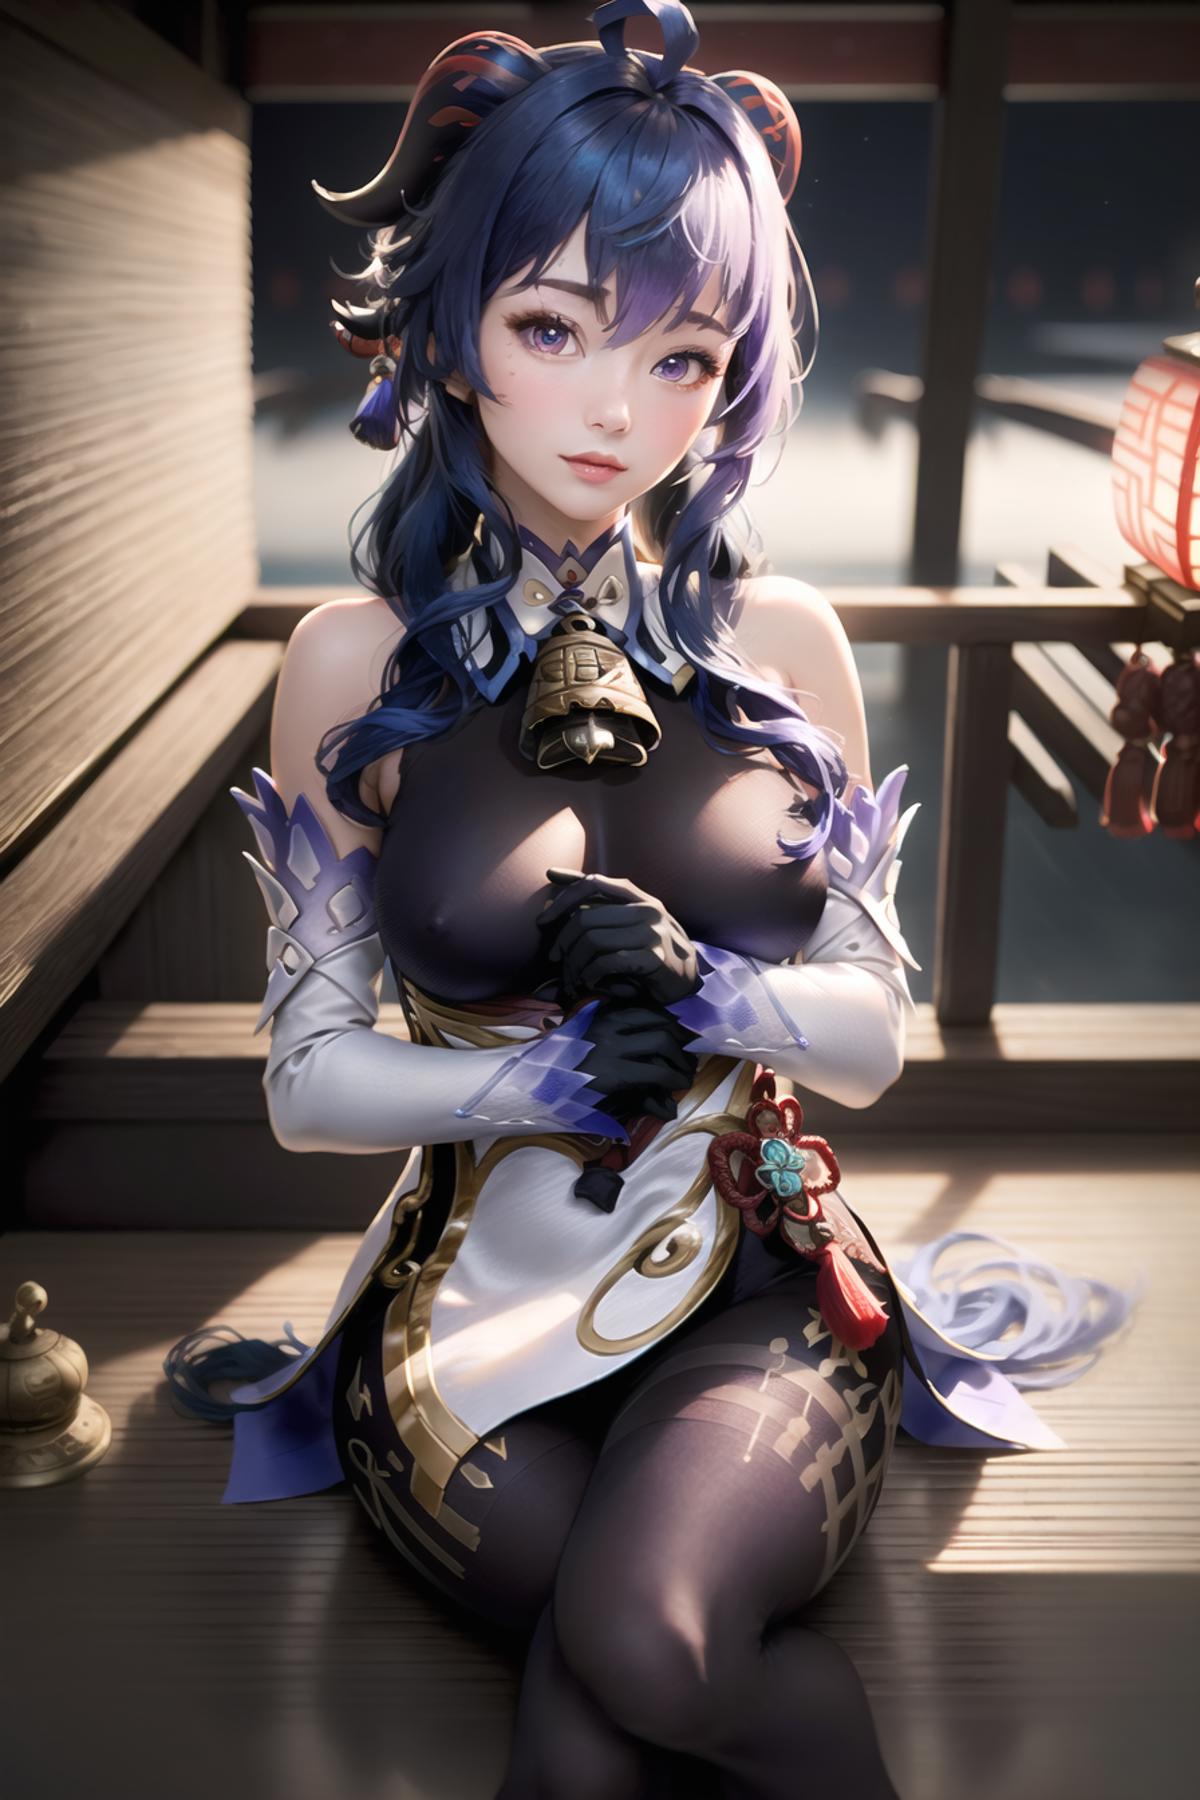 AI model image by wyuan3849424